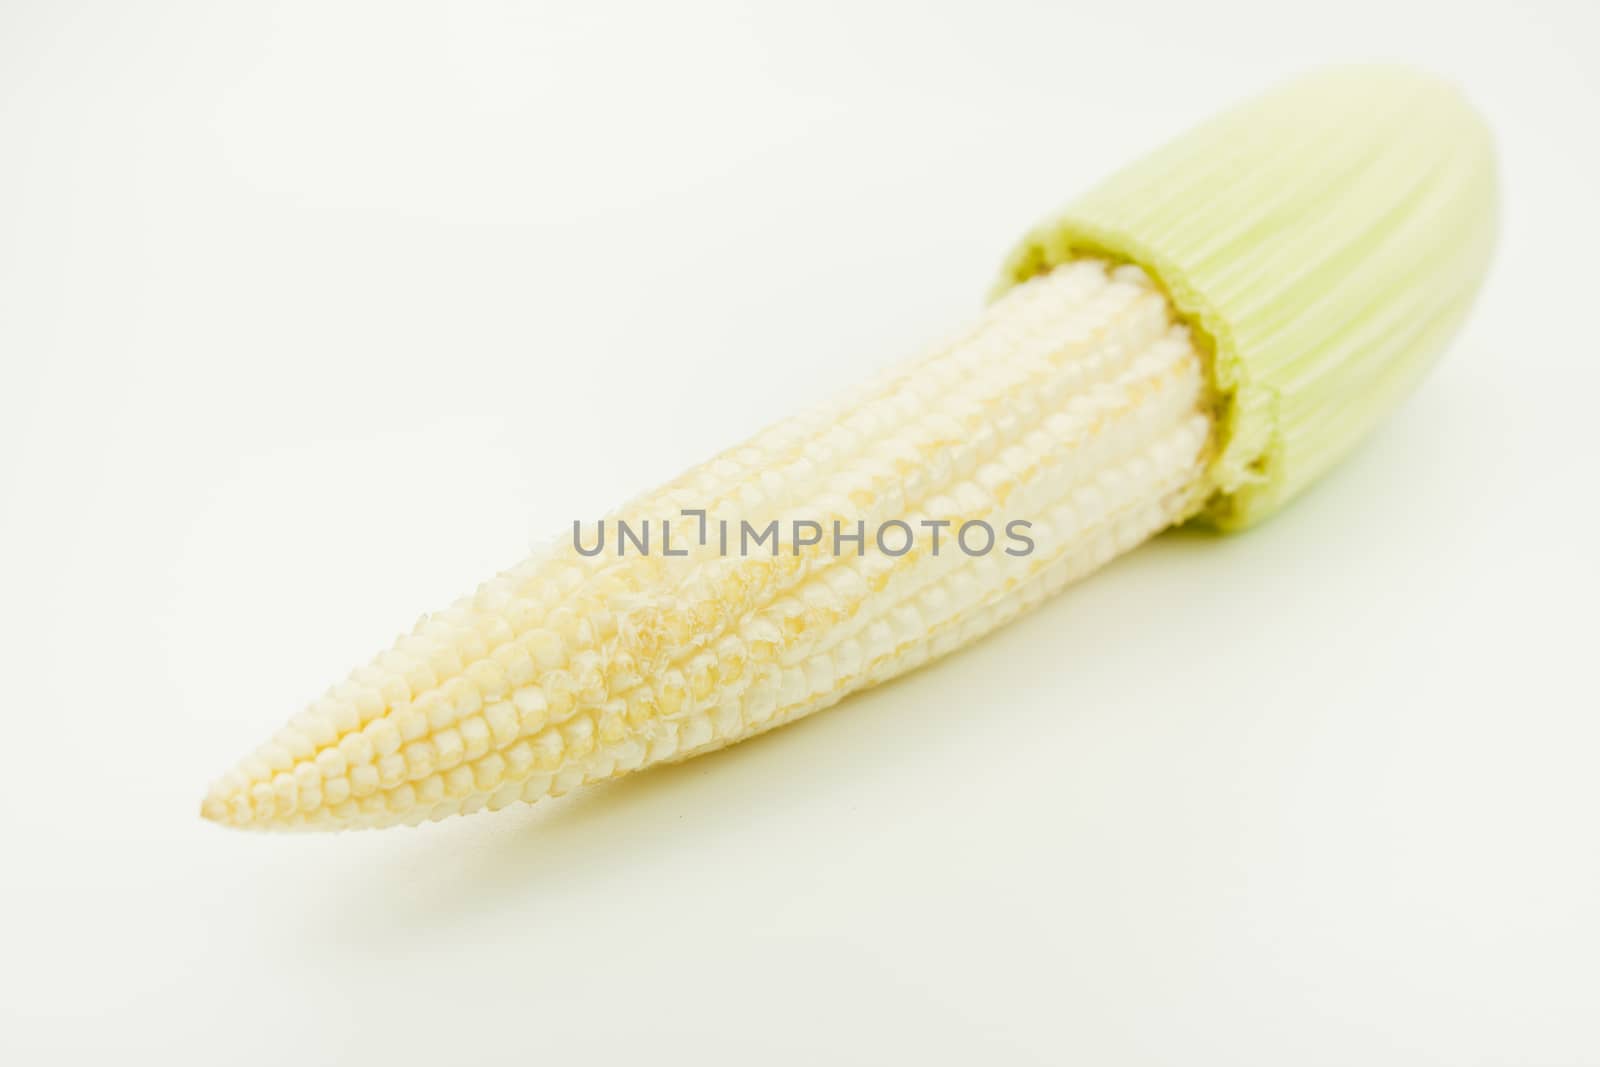 baby corn by audfriday13